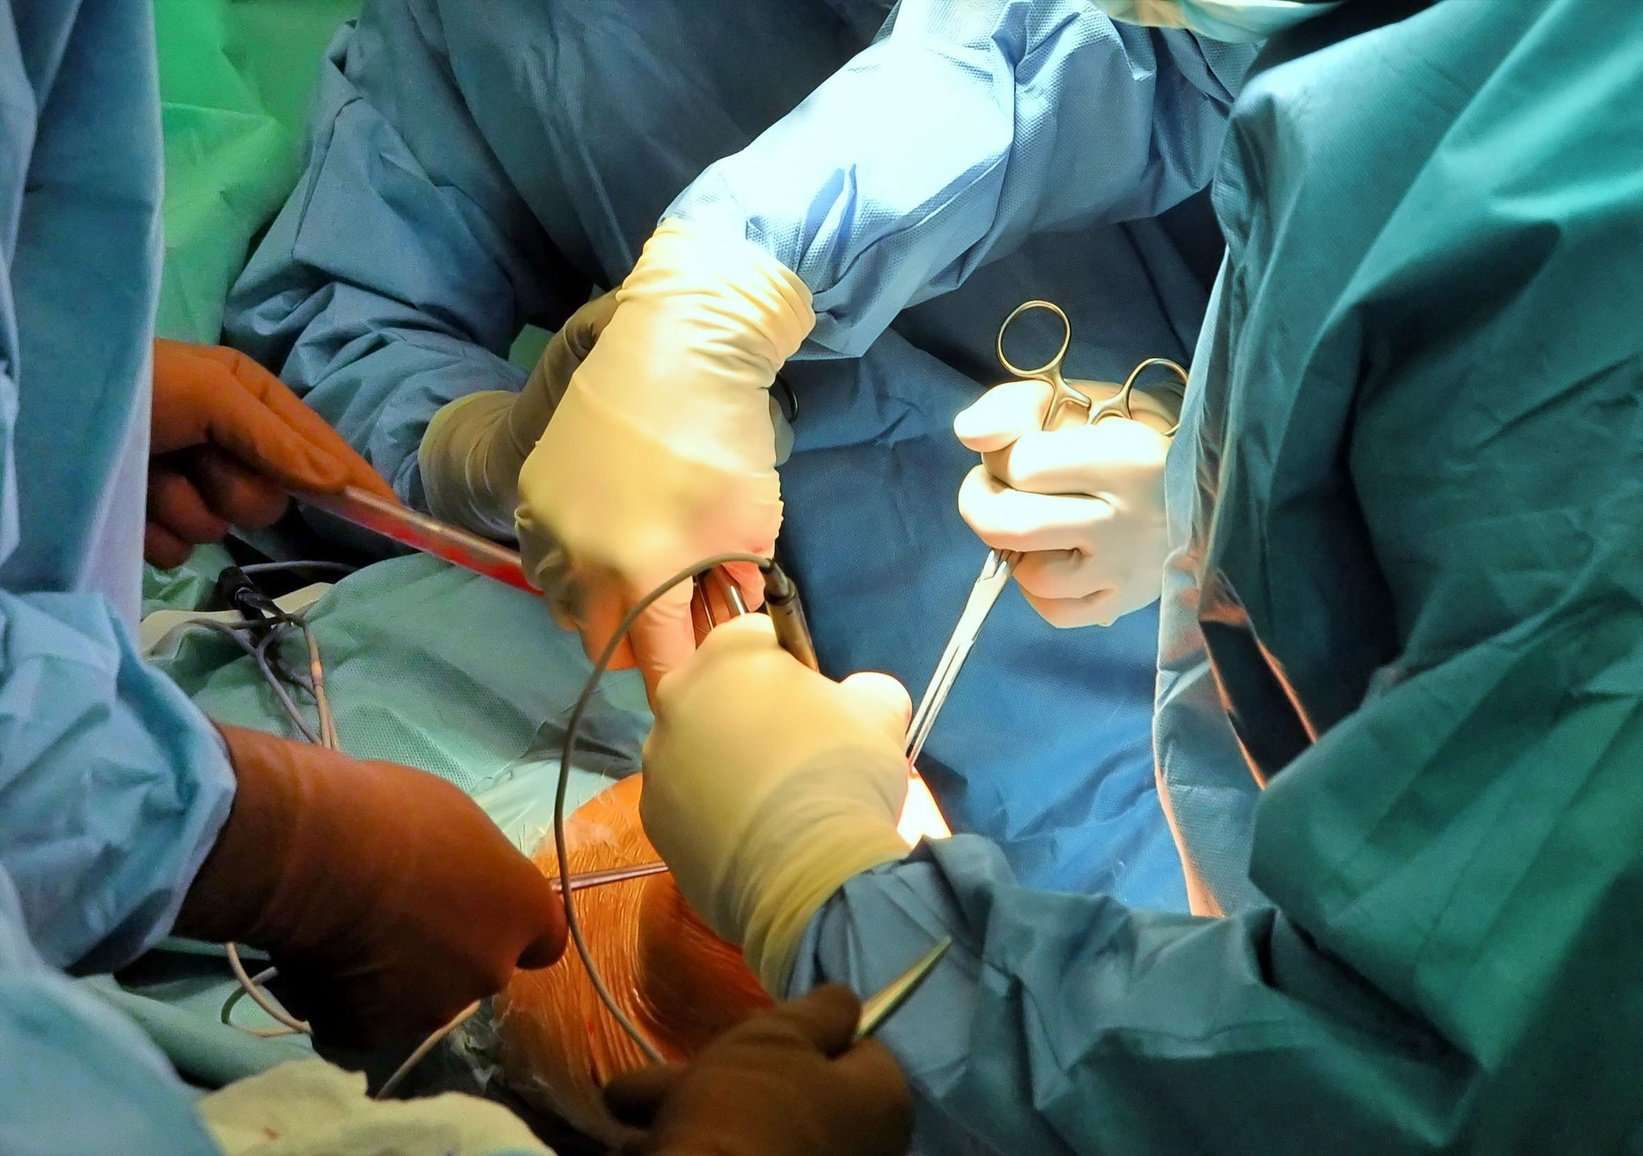 Knee Replacement Surgery for Knee Arthritis